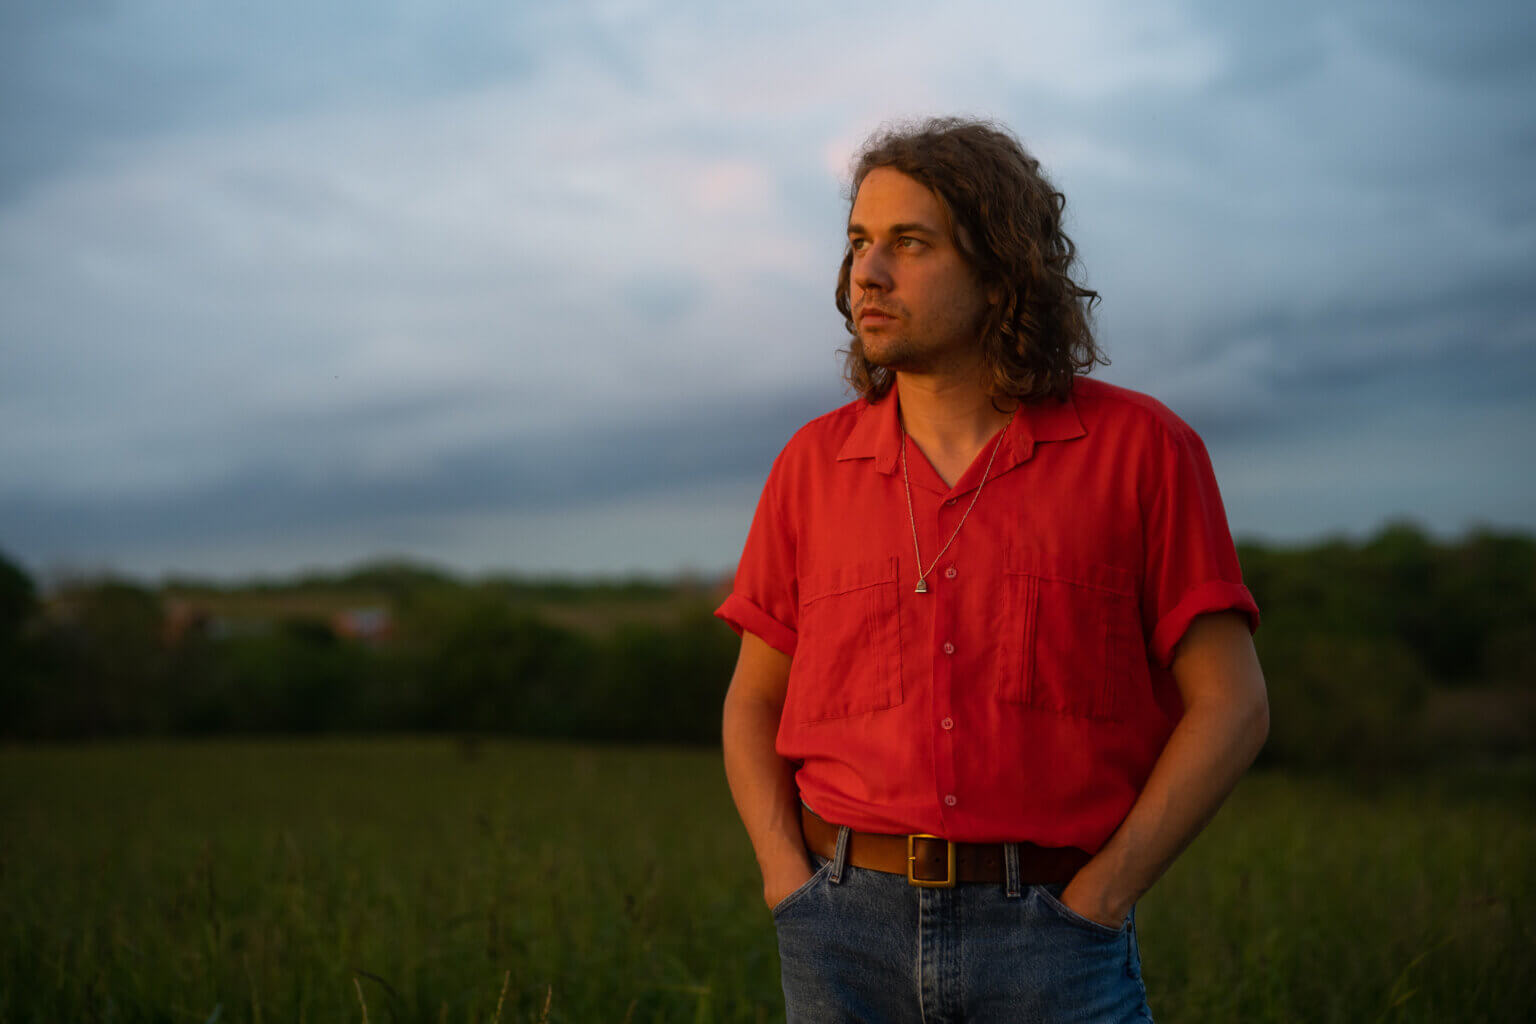 "Sundowner" by Kevin Morby is Northern Transmissions Song of the Day.